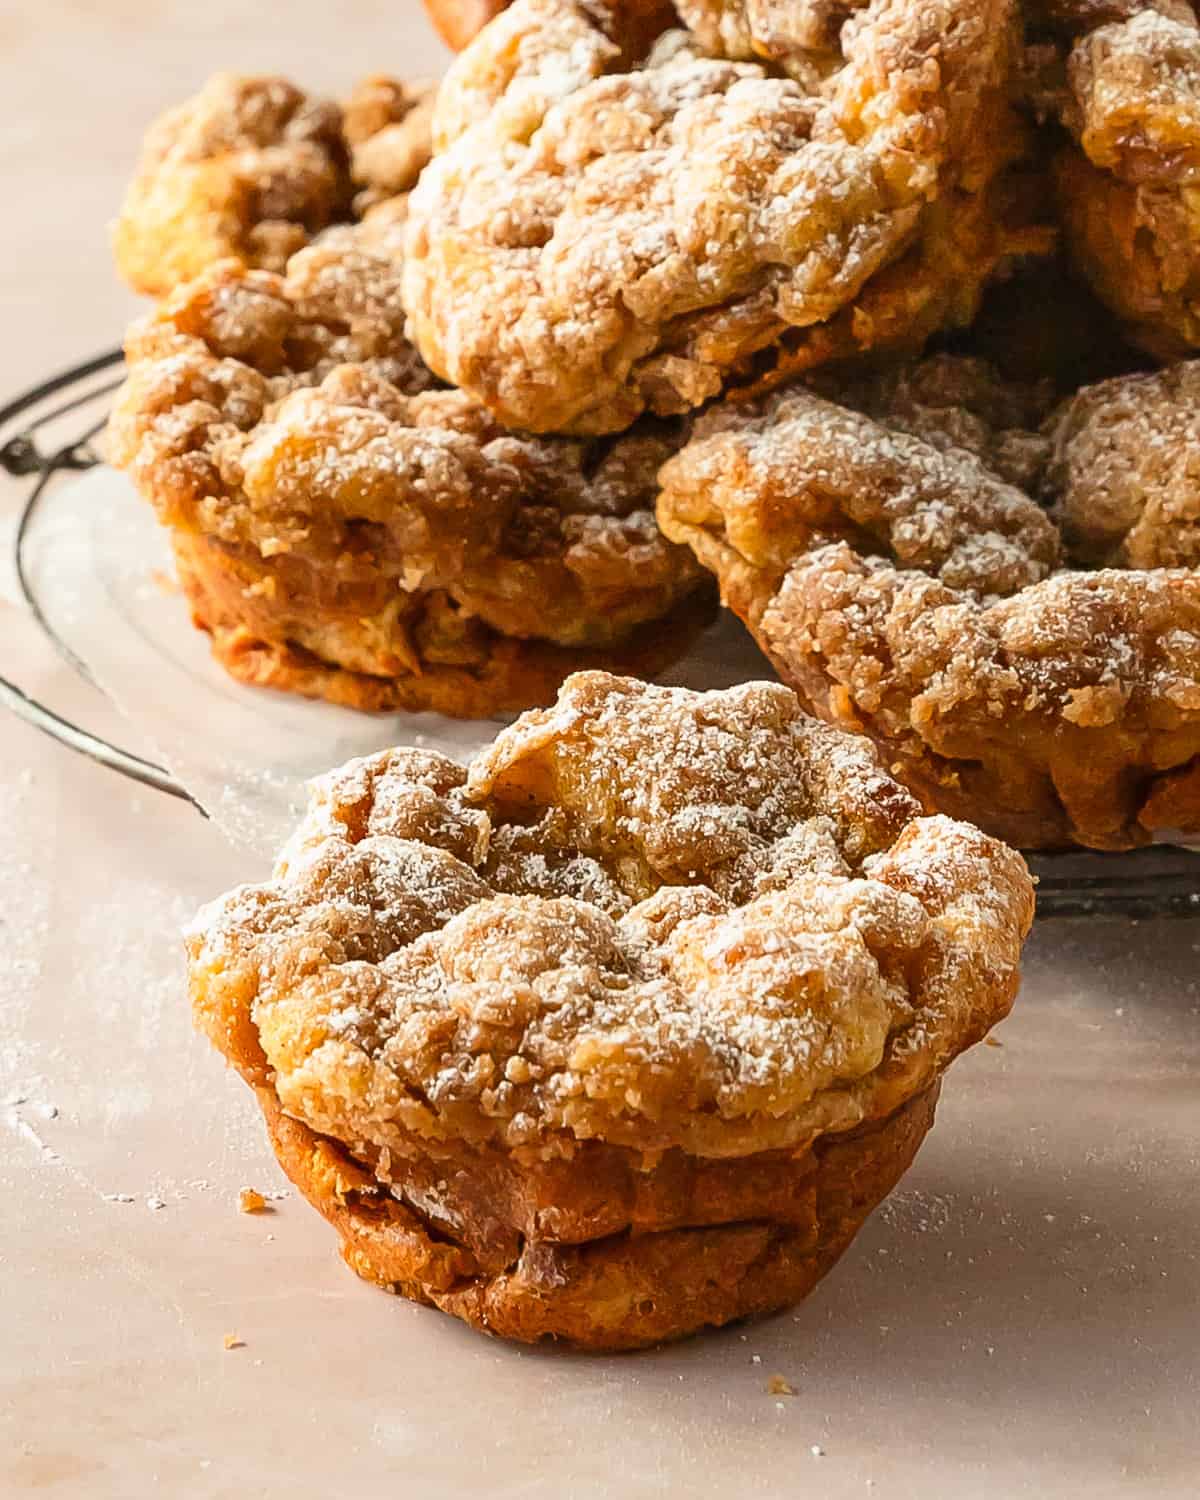 French toast muffins is a quick and easy french toast recipe baked in a muffin pan. These soft and buttery french toast cups are topped with a crunchy cinnamon streusel topping.  Once baked, these delicious cinnamon toast muffins can be topped with maple syrup, powdered sugar or enjoyed as is for a fun and tasty breakfast treat.